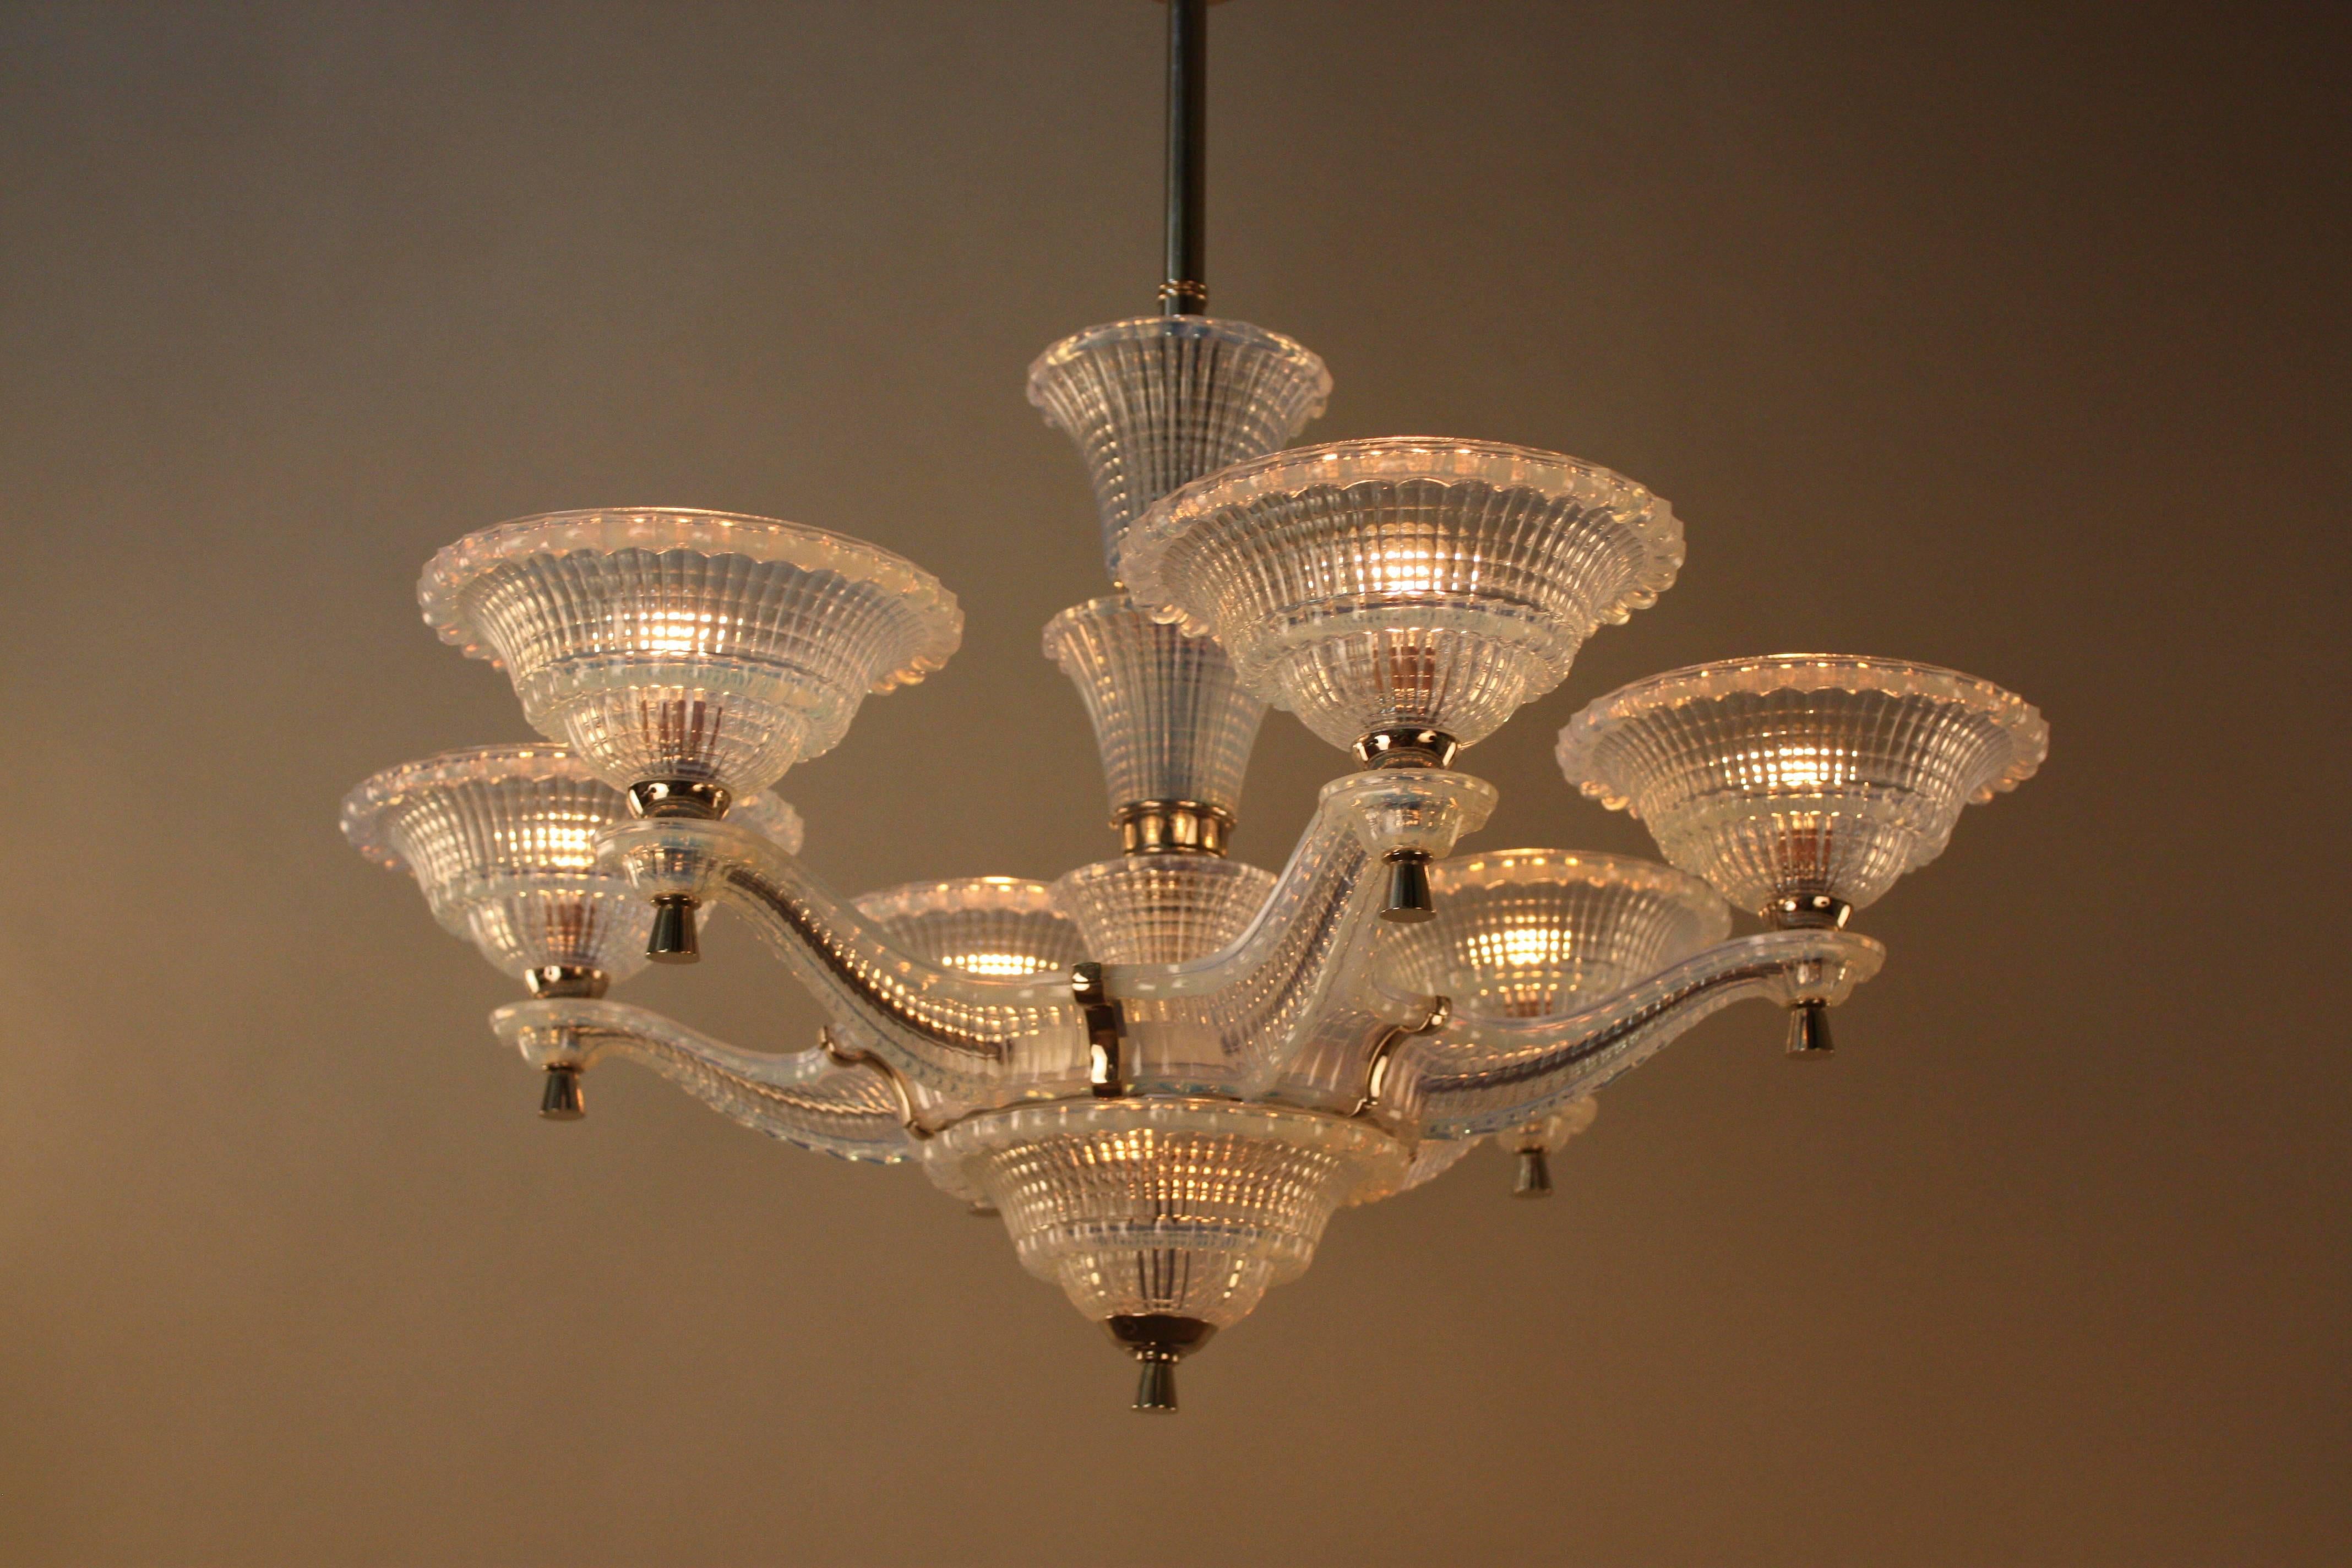 An stunning Art Deco chandelier. Made during 1930s this six-arm eight-light chandelier is entirely made of opalescent glass except some nickel on bronze hardware and canopy.
60 watt max each light.